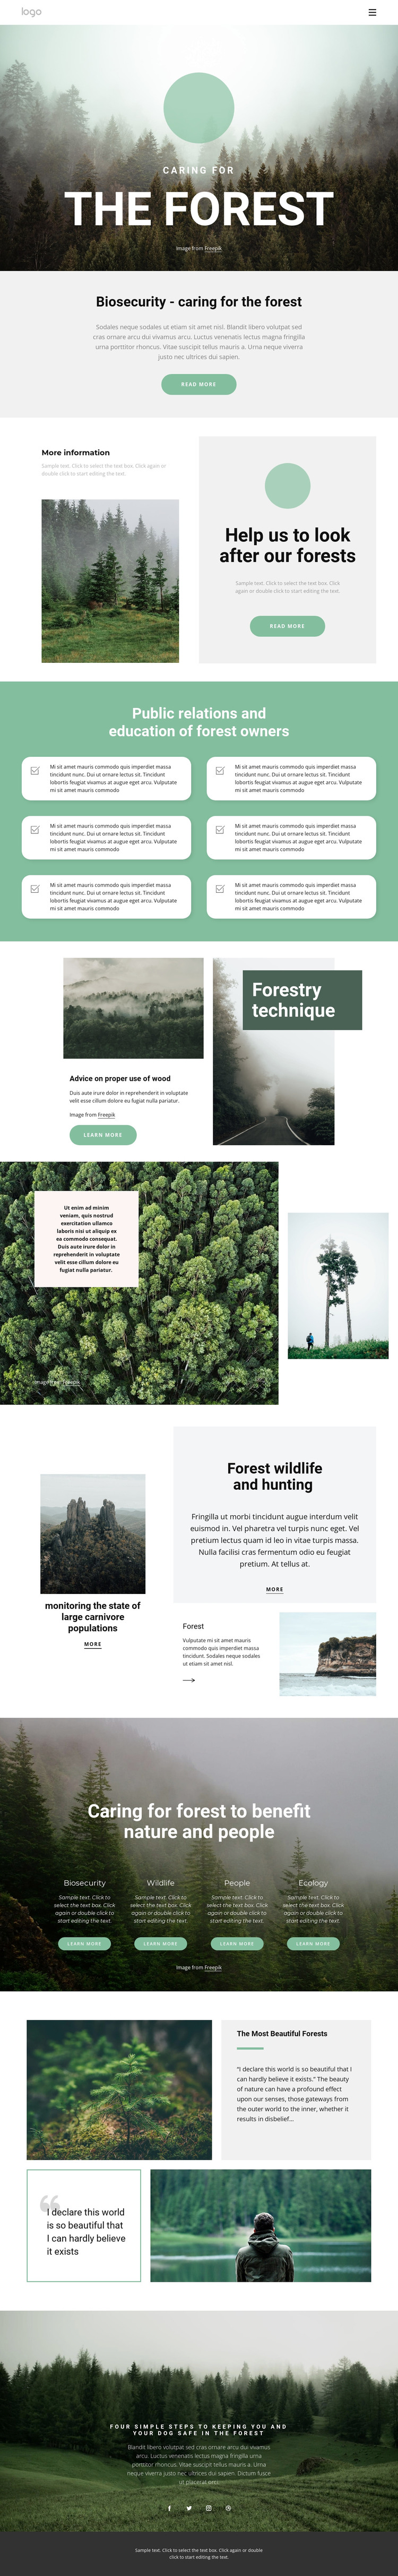 Caring for parks and forests WordPress Theme